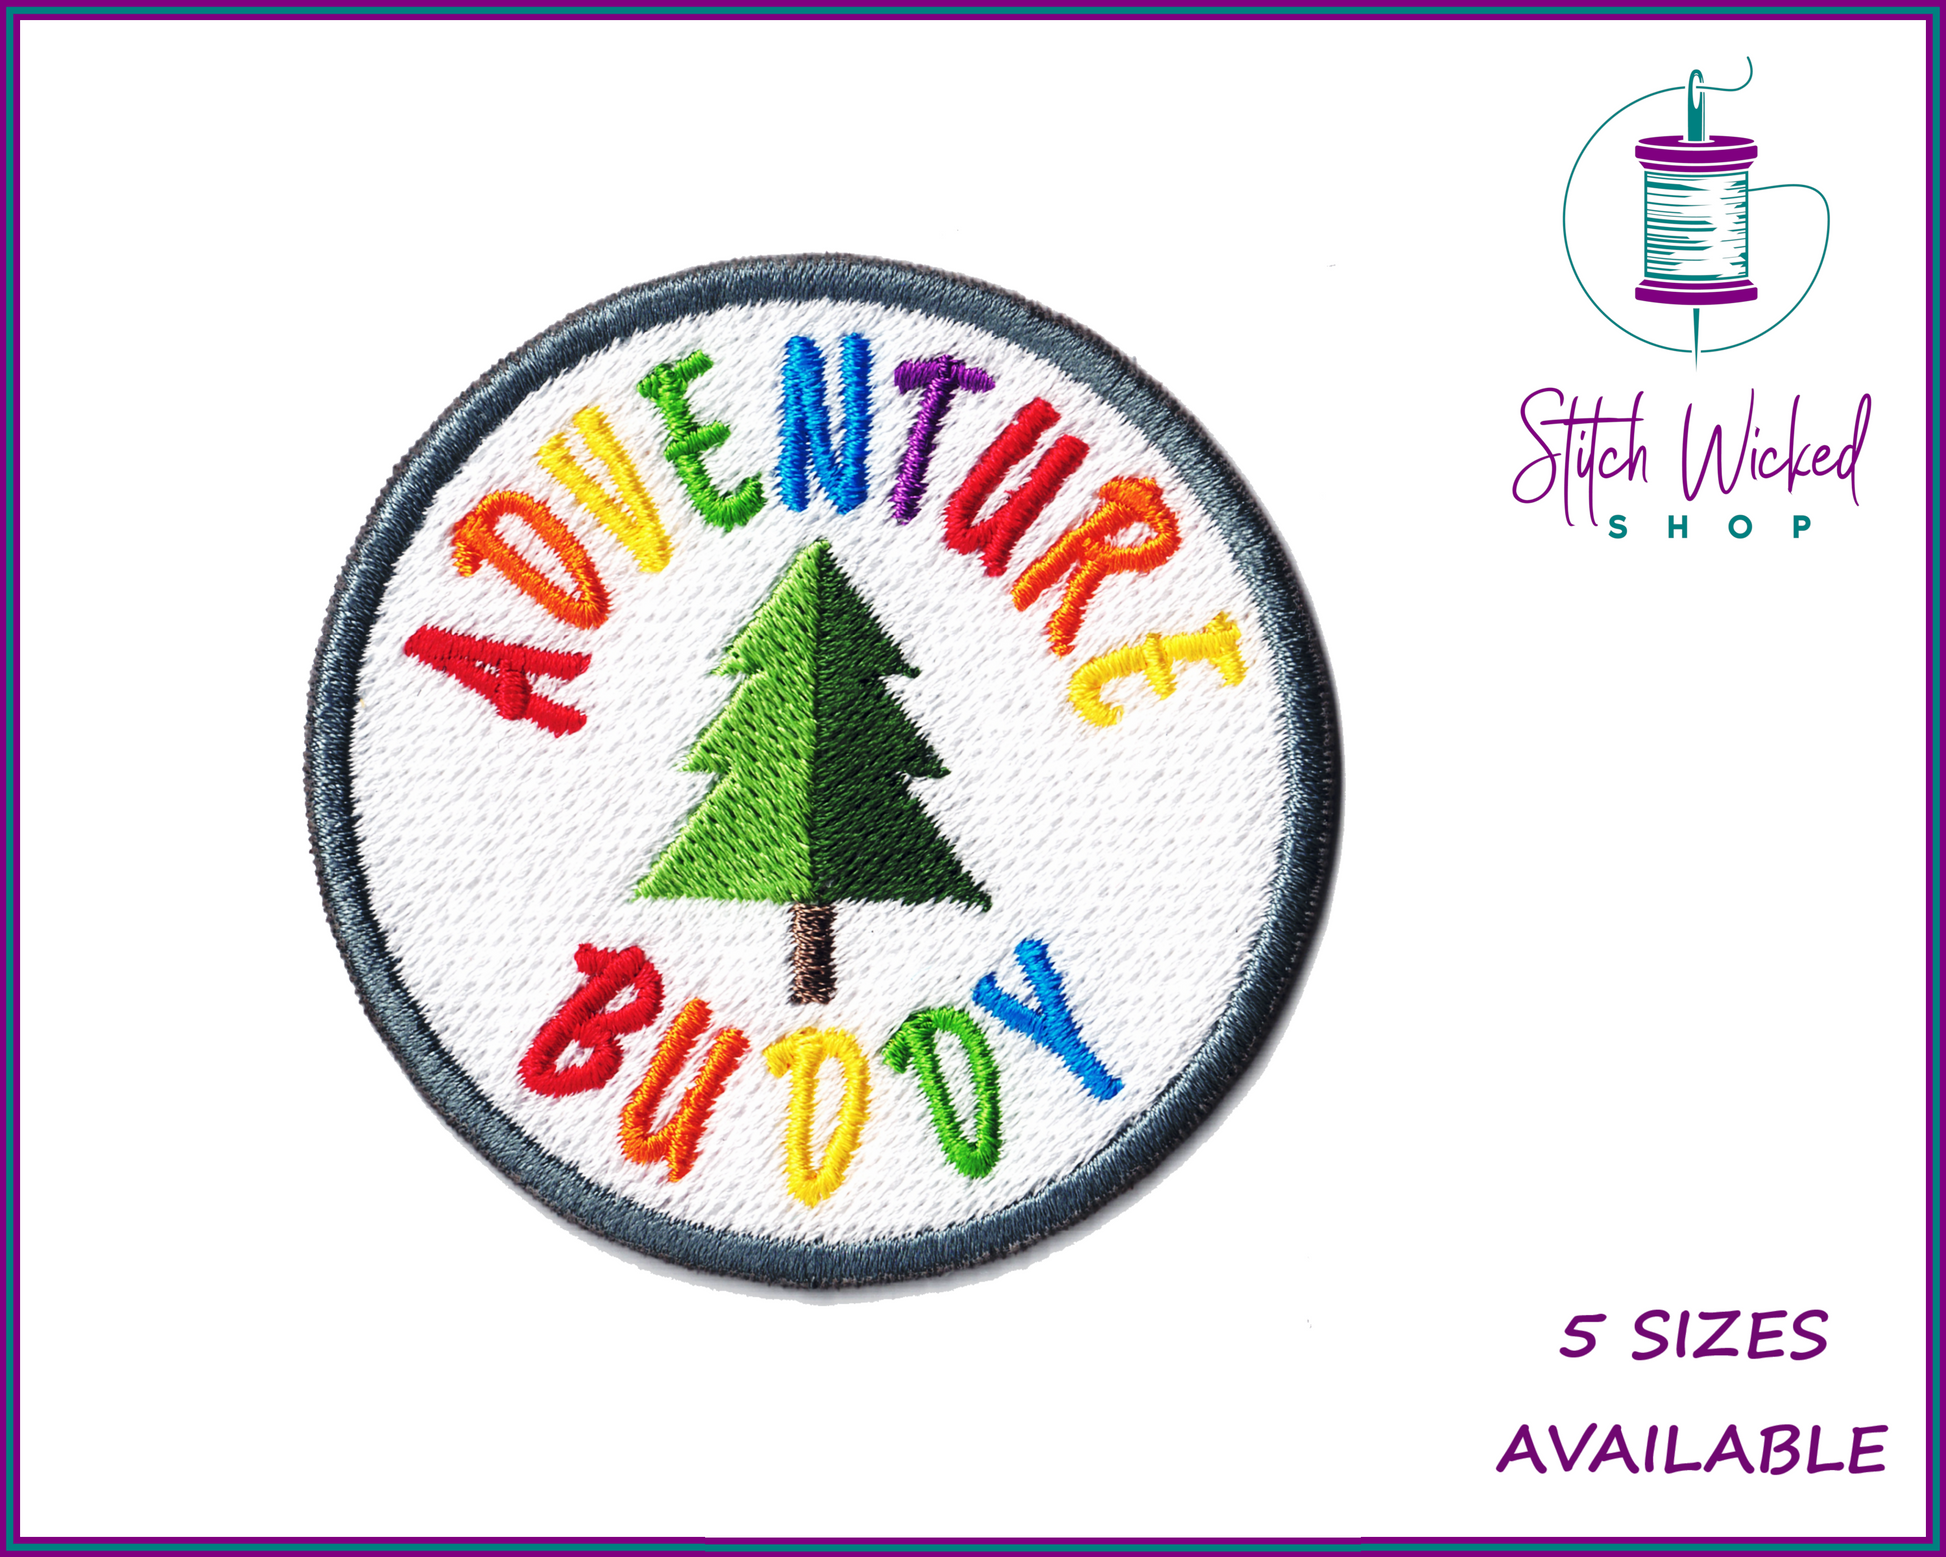 Custom Name Patches – Stitch Wicked Shop